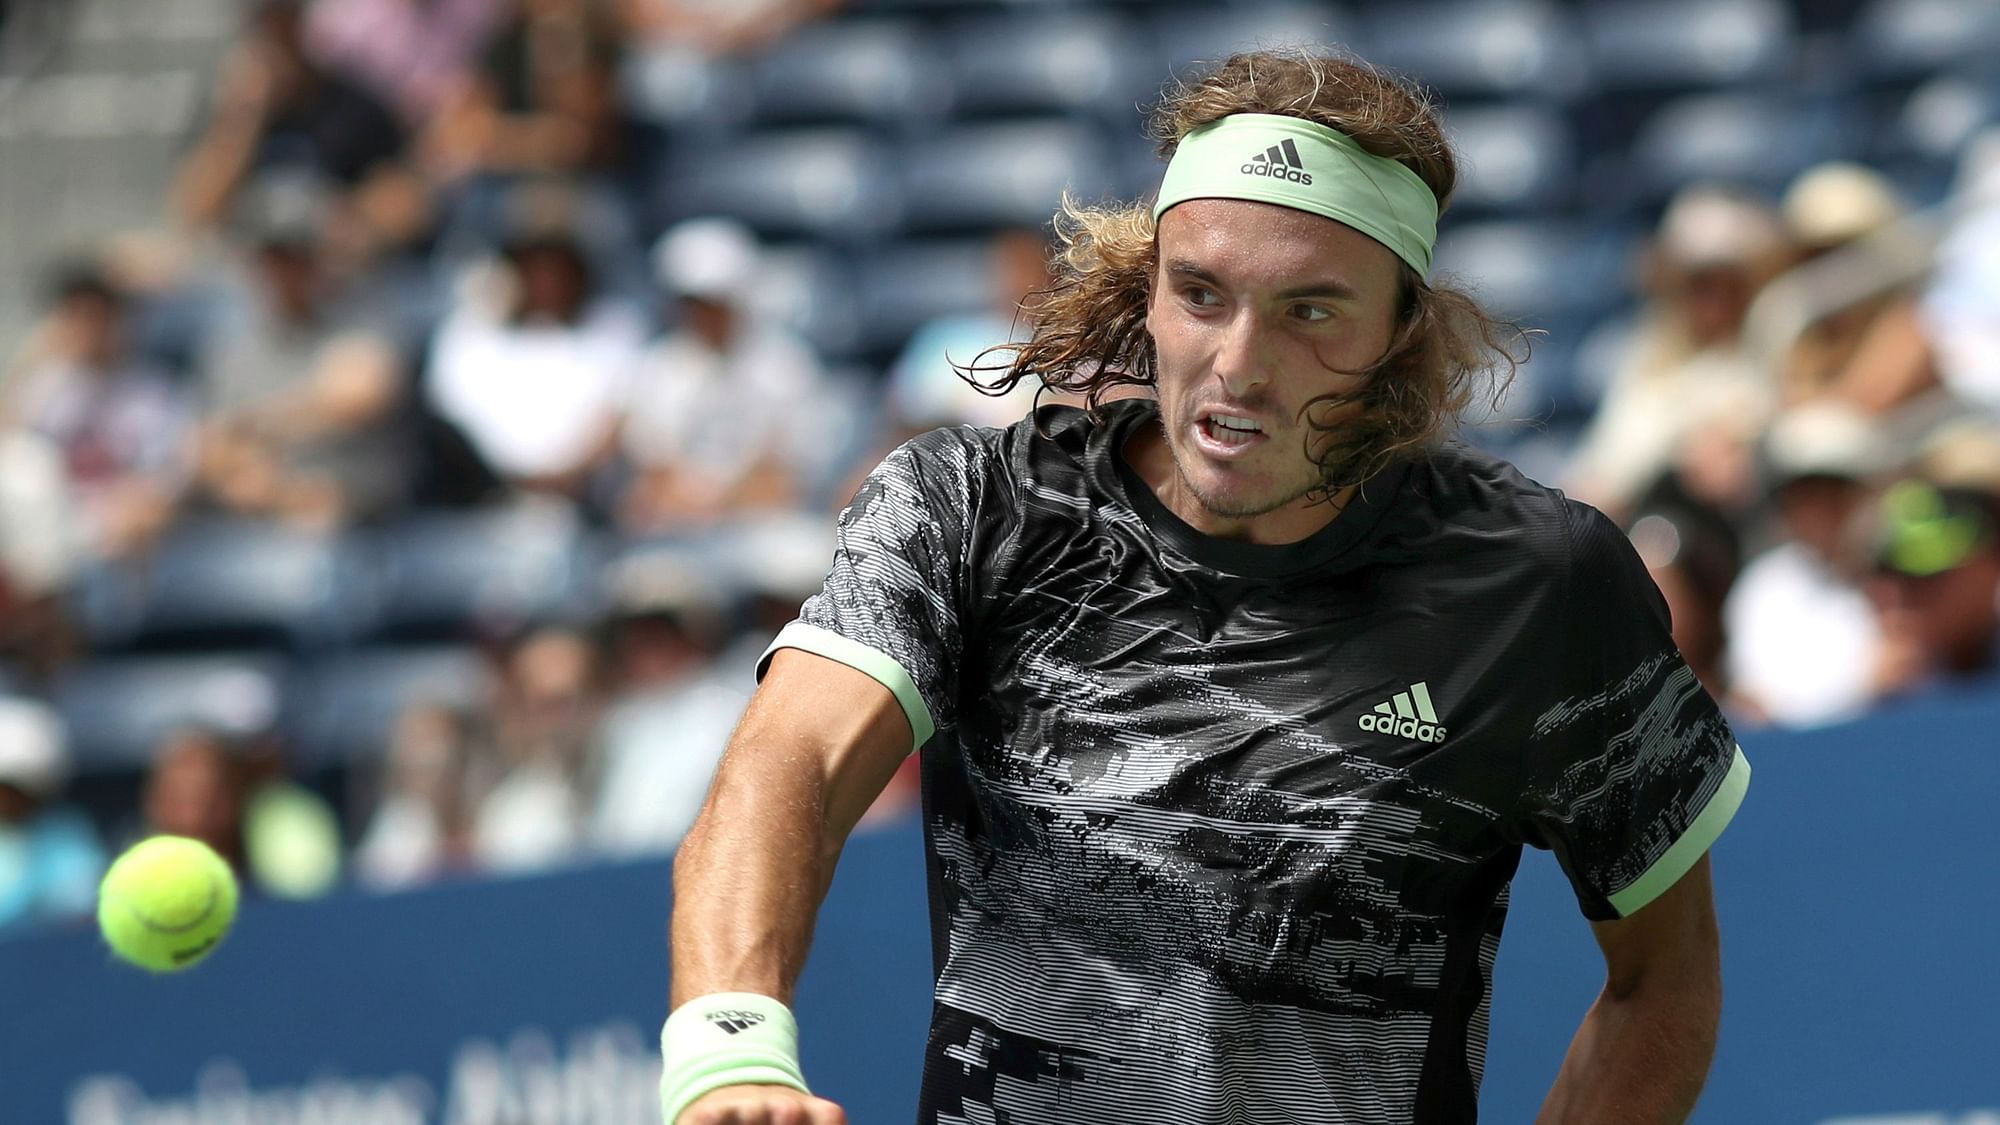 Stefanos Tsitsipas accused a US Open chair umpire of having a bias against him during a tirade.